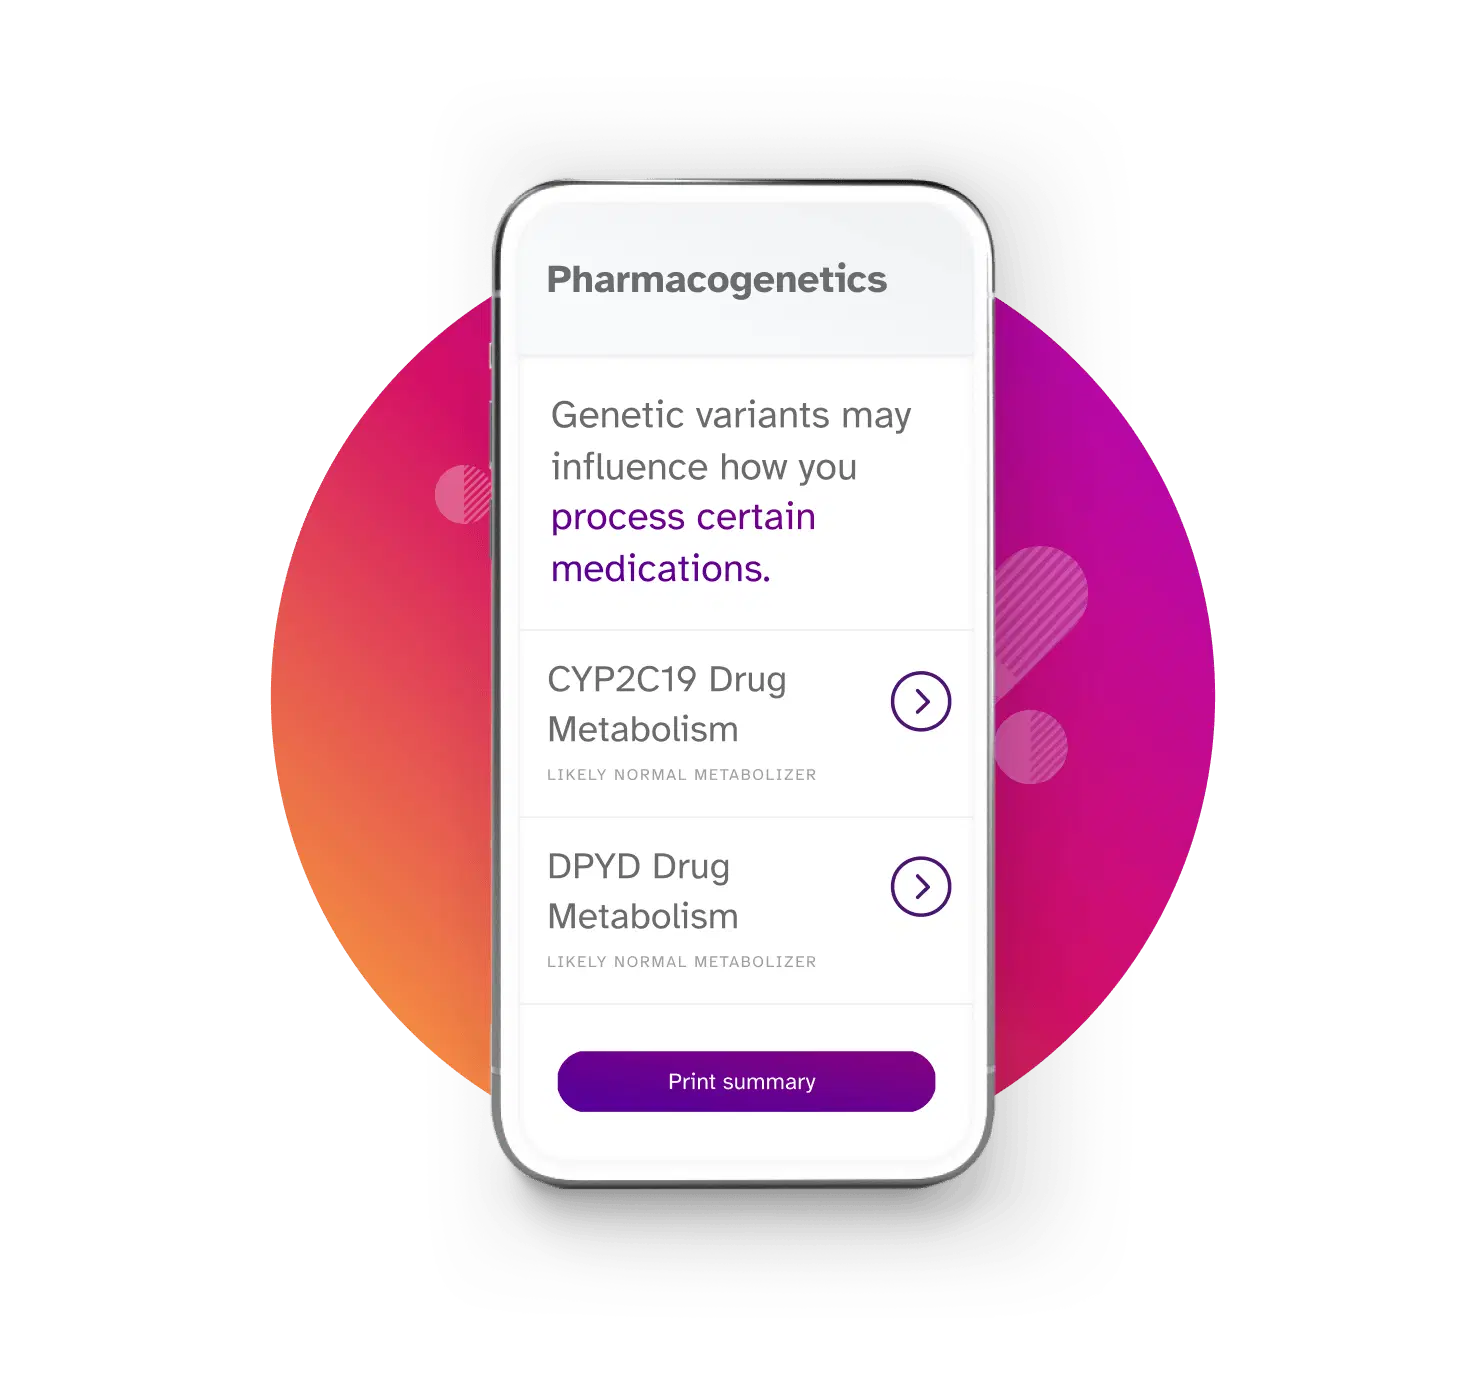 Phone screen showing Pharmacogenetics reports. These reports test for genetic variants that may influence how you process medications. The examples shown are the CYP2C19 Drug Metabolism report (likely normal metabolizer result) and the DPYD Drug Metabolizer report (likely normal metabolizer).